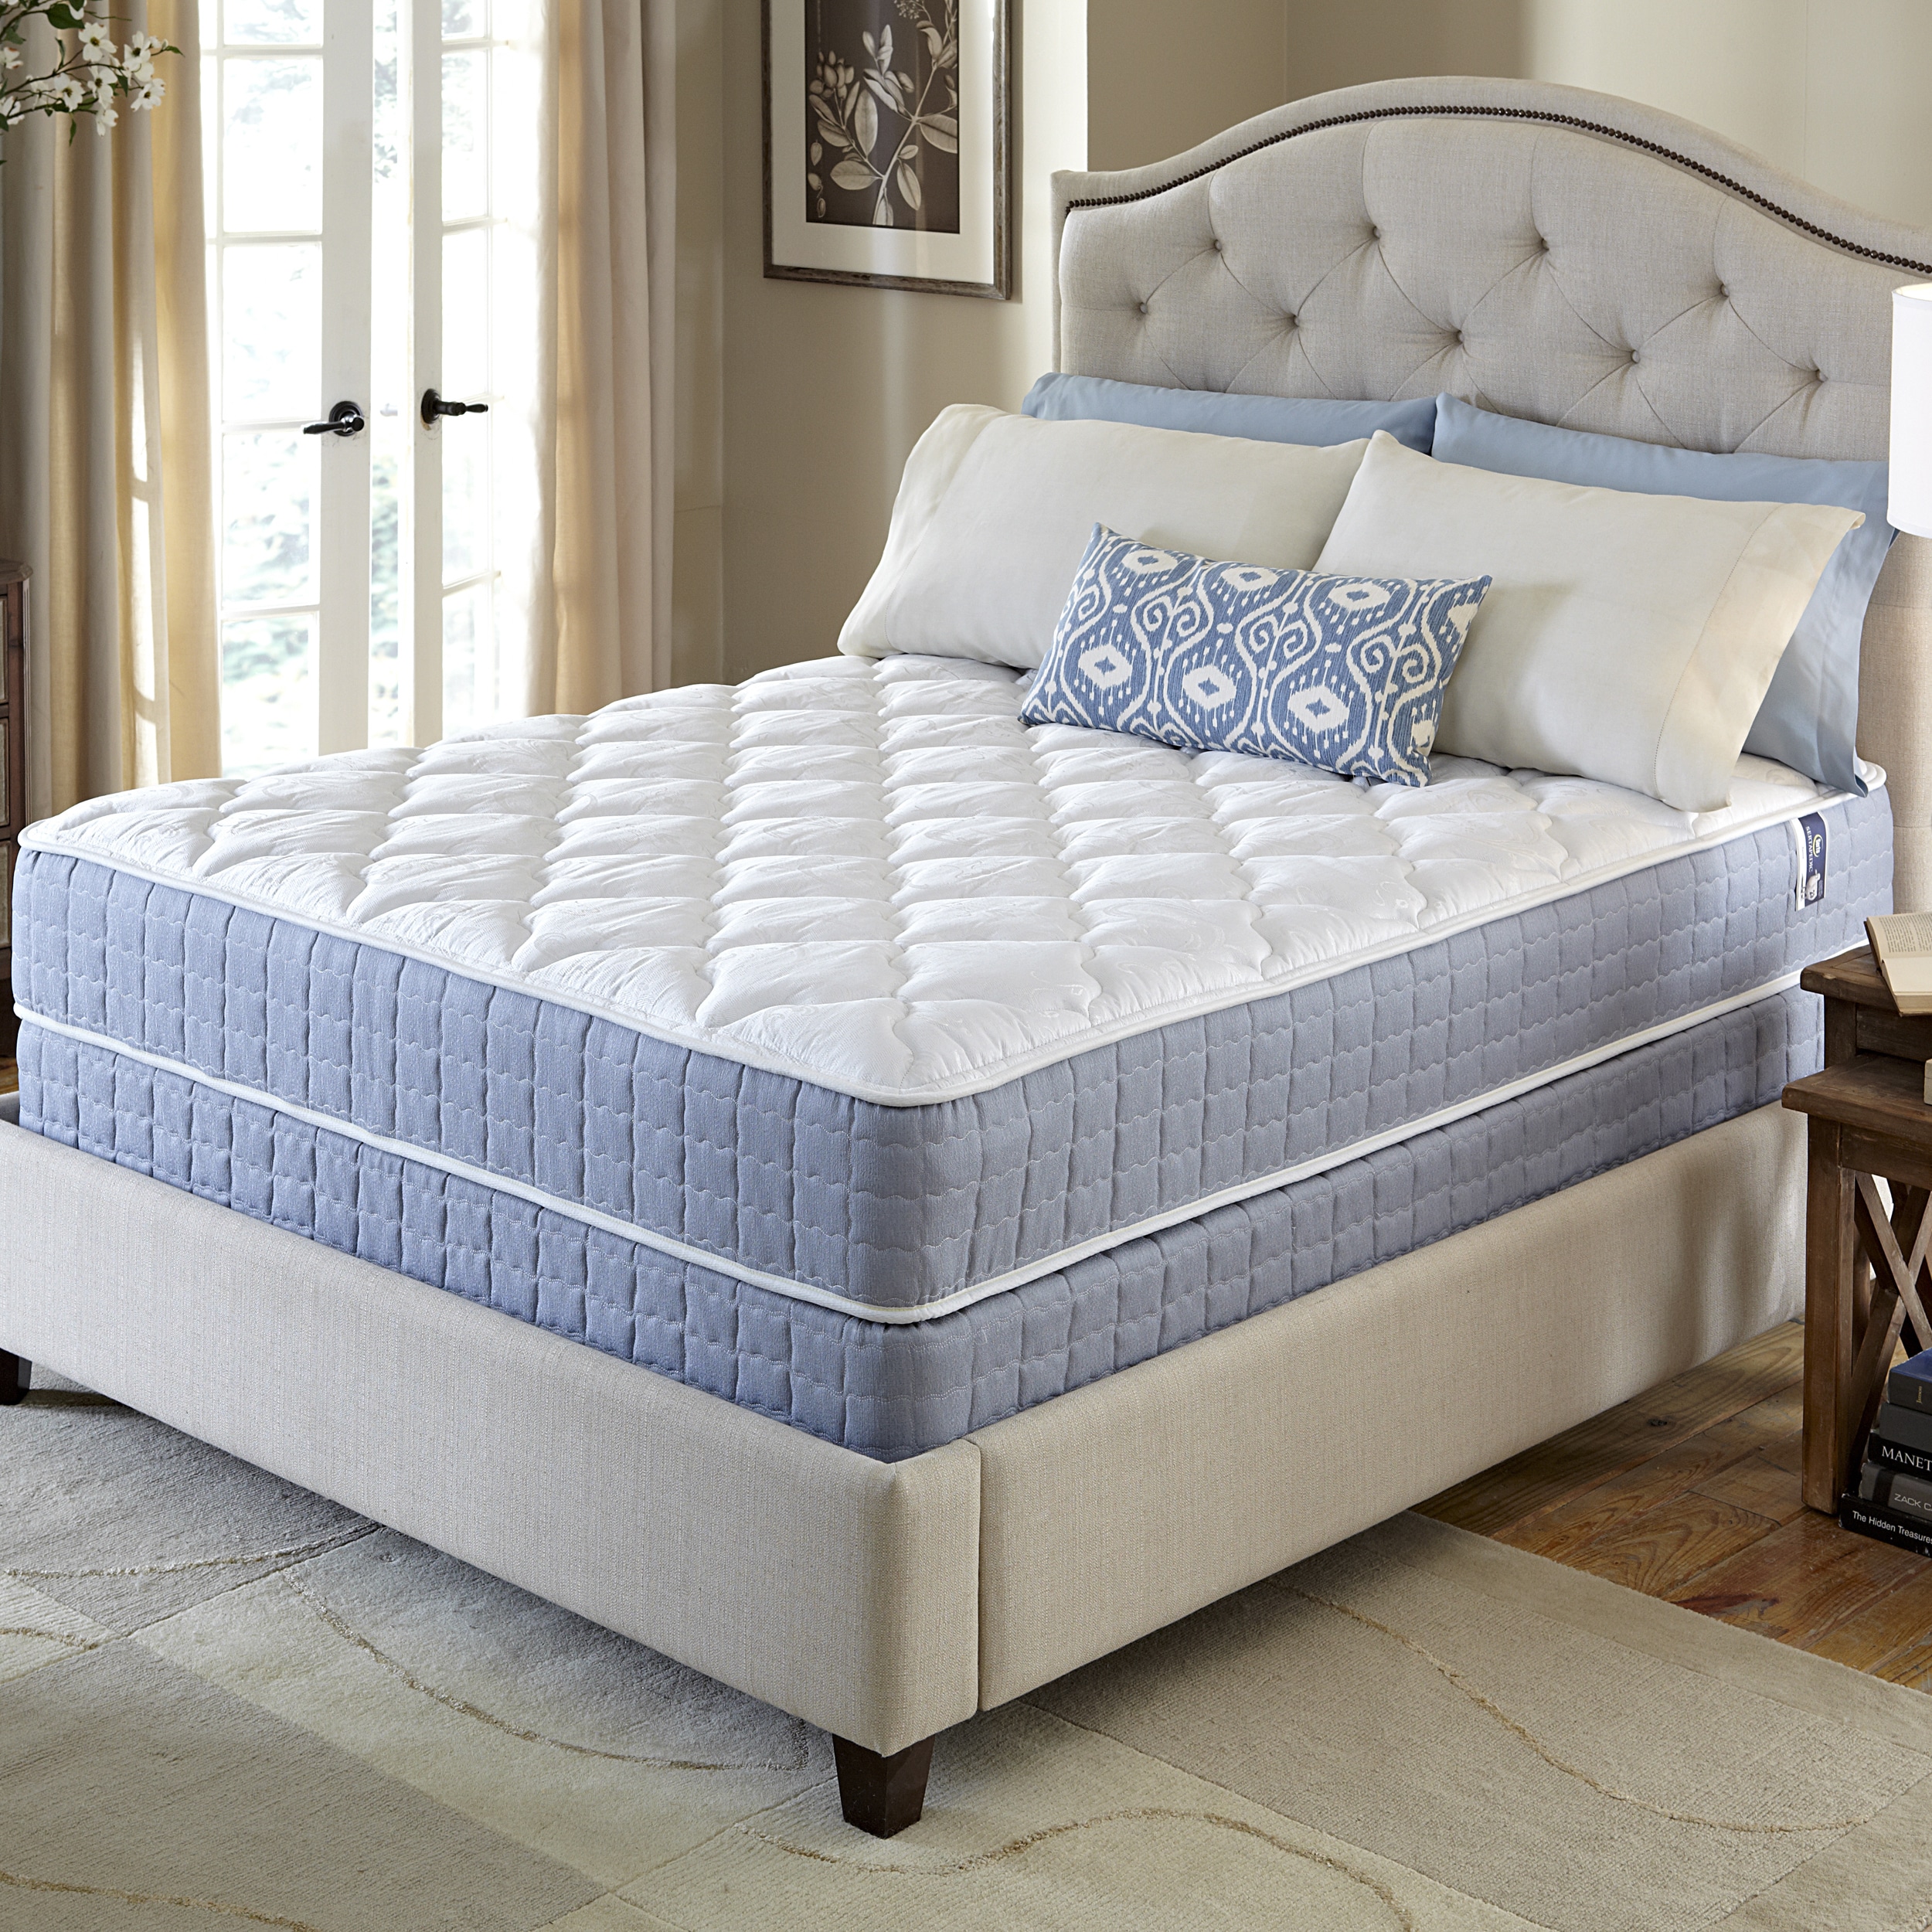 Serta Revival Firm Twin Size Mattress And Foundation Set